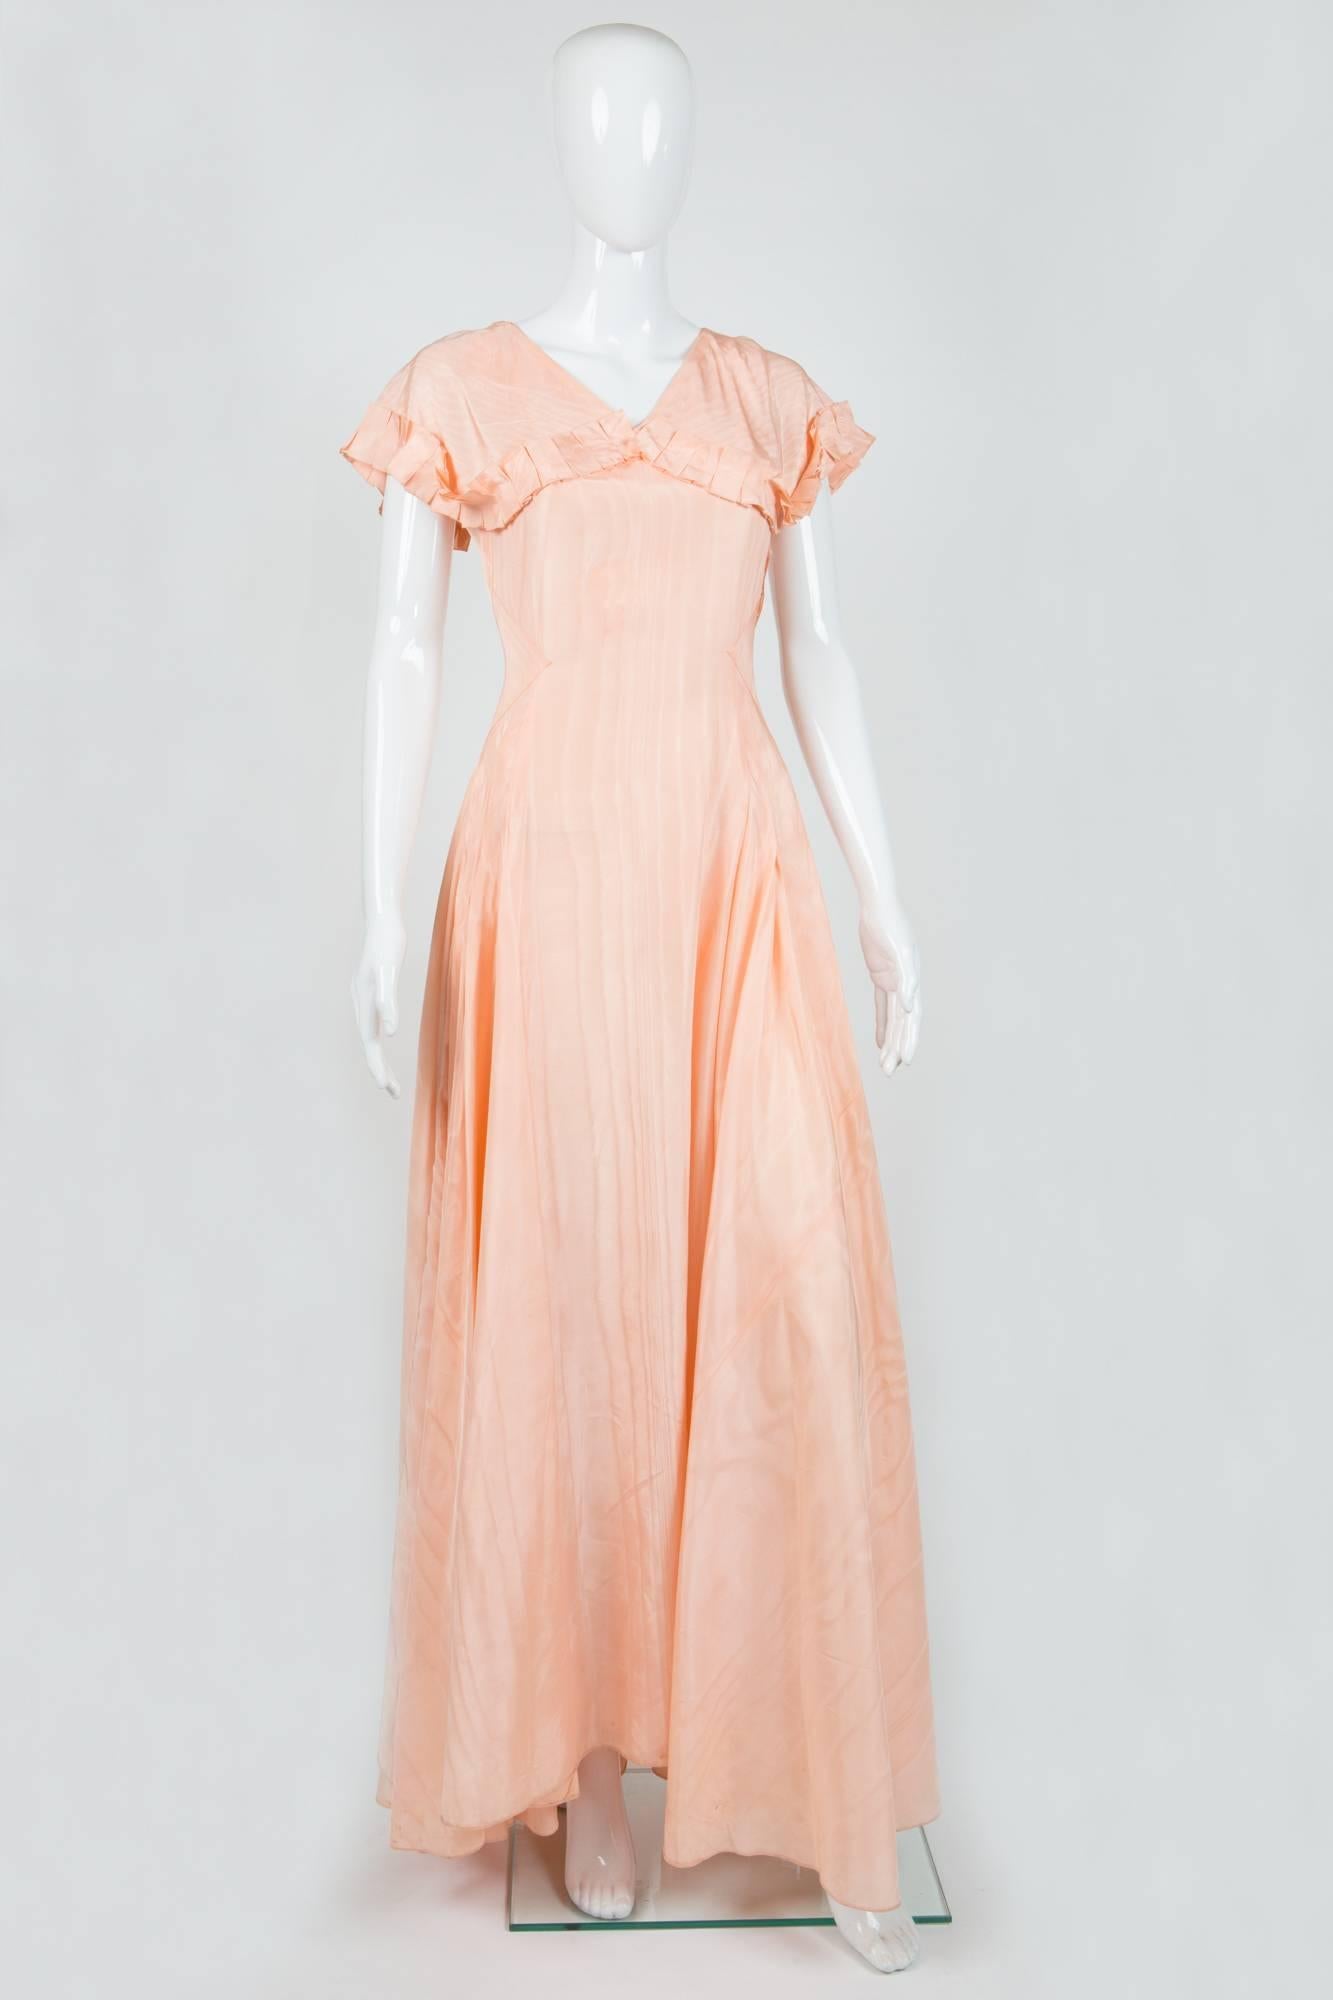 Gorgeous 1940s peach pink silk dress featuring maxi length,  fixed flounces on front bust & goes on back sleeves, bias cut with many tailoring details, maxi length.
In good vintage condition ( a small mini hole at back). Made in France.
Estimated